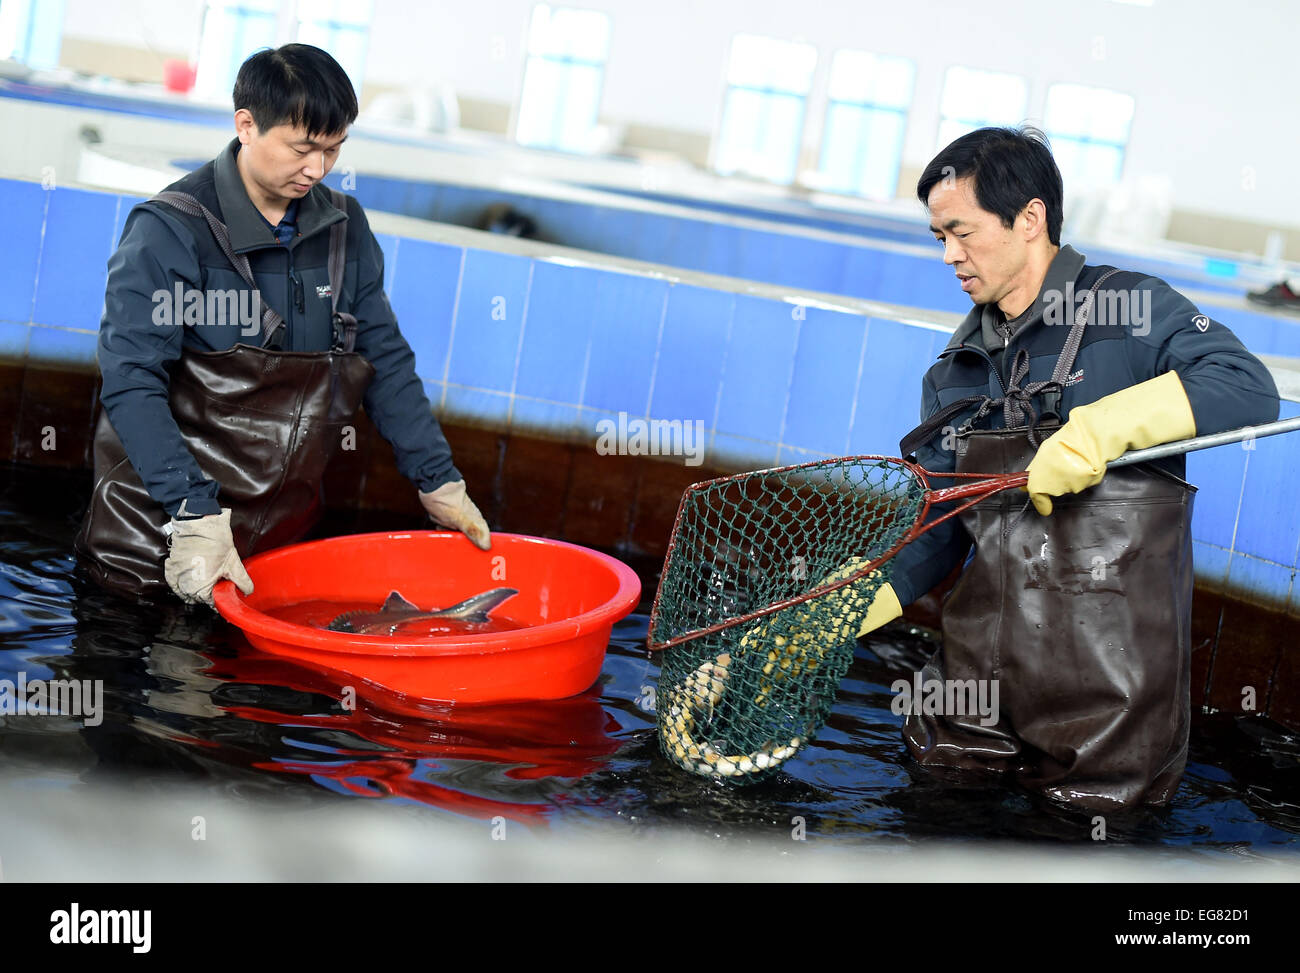 (150219) -- YICHANG, Feb. 19, 2015 (Xinhua) -- Breeders check artificially-bred Chinese sturgeons in a tank at the Chinese Sturgeons Research Institute (CSRI) in Yichang, central China's Hubei Province, Feb. 19, 2015. Chinese sturgeons, nicknamed 'aquatic pandas', are listed as a wild creature under state protection. Researchers with CSRI succeeded in artificially inseminating and spawning a culture of sturgeons in 2009. Since then fish have been released into the river every year to save the species from extinction. At present, some 5,000 artificially-bred sturgeons live in the CSRI, which is Stock Photo